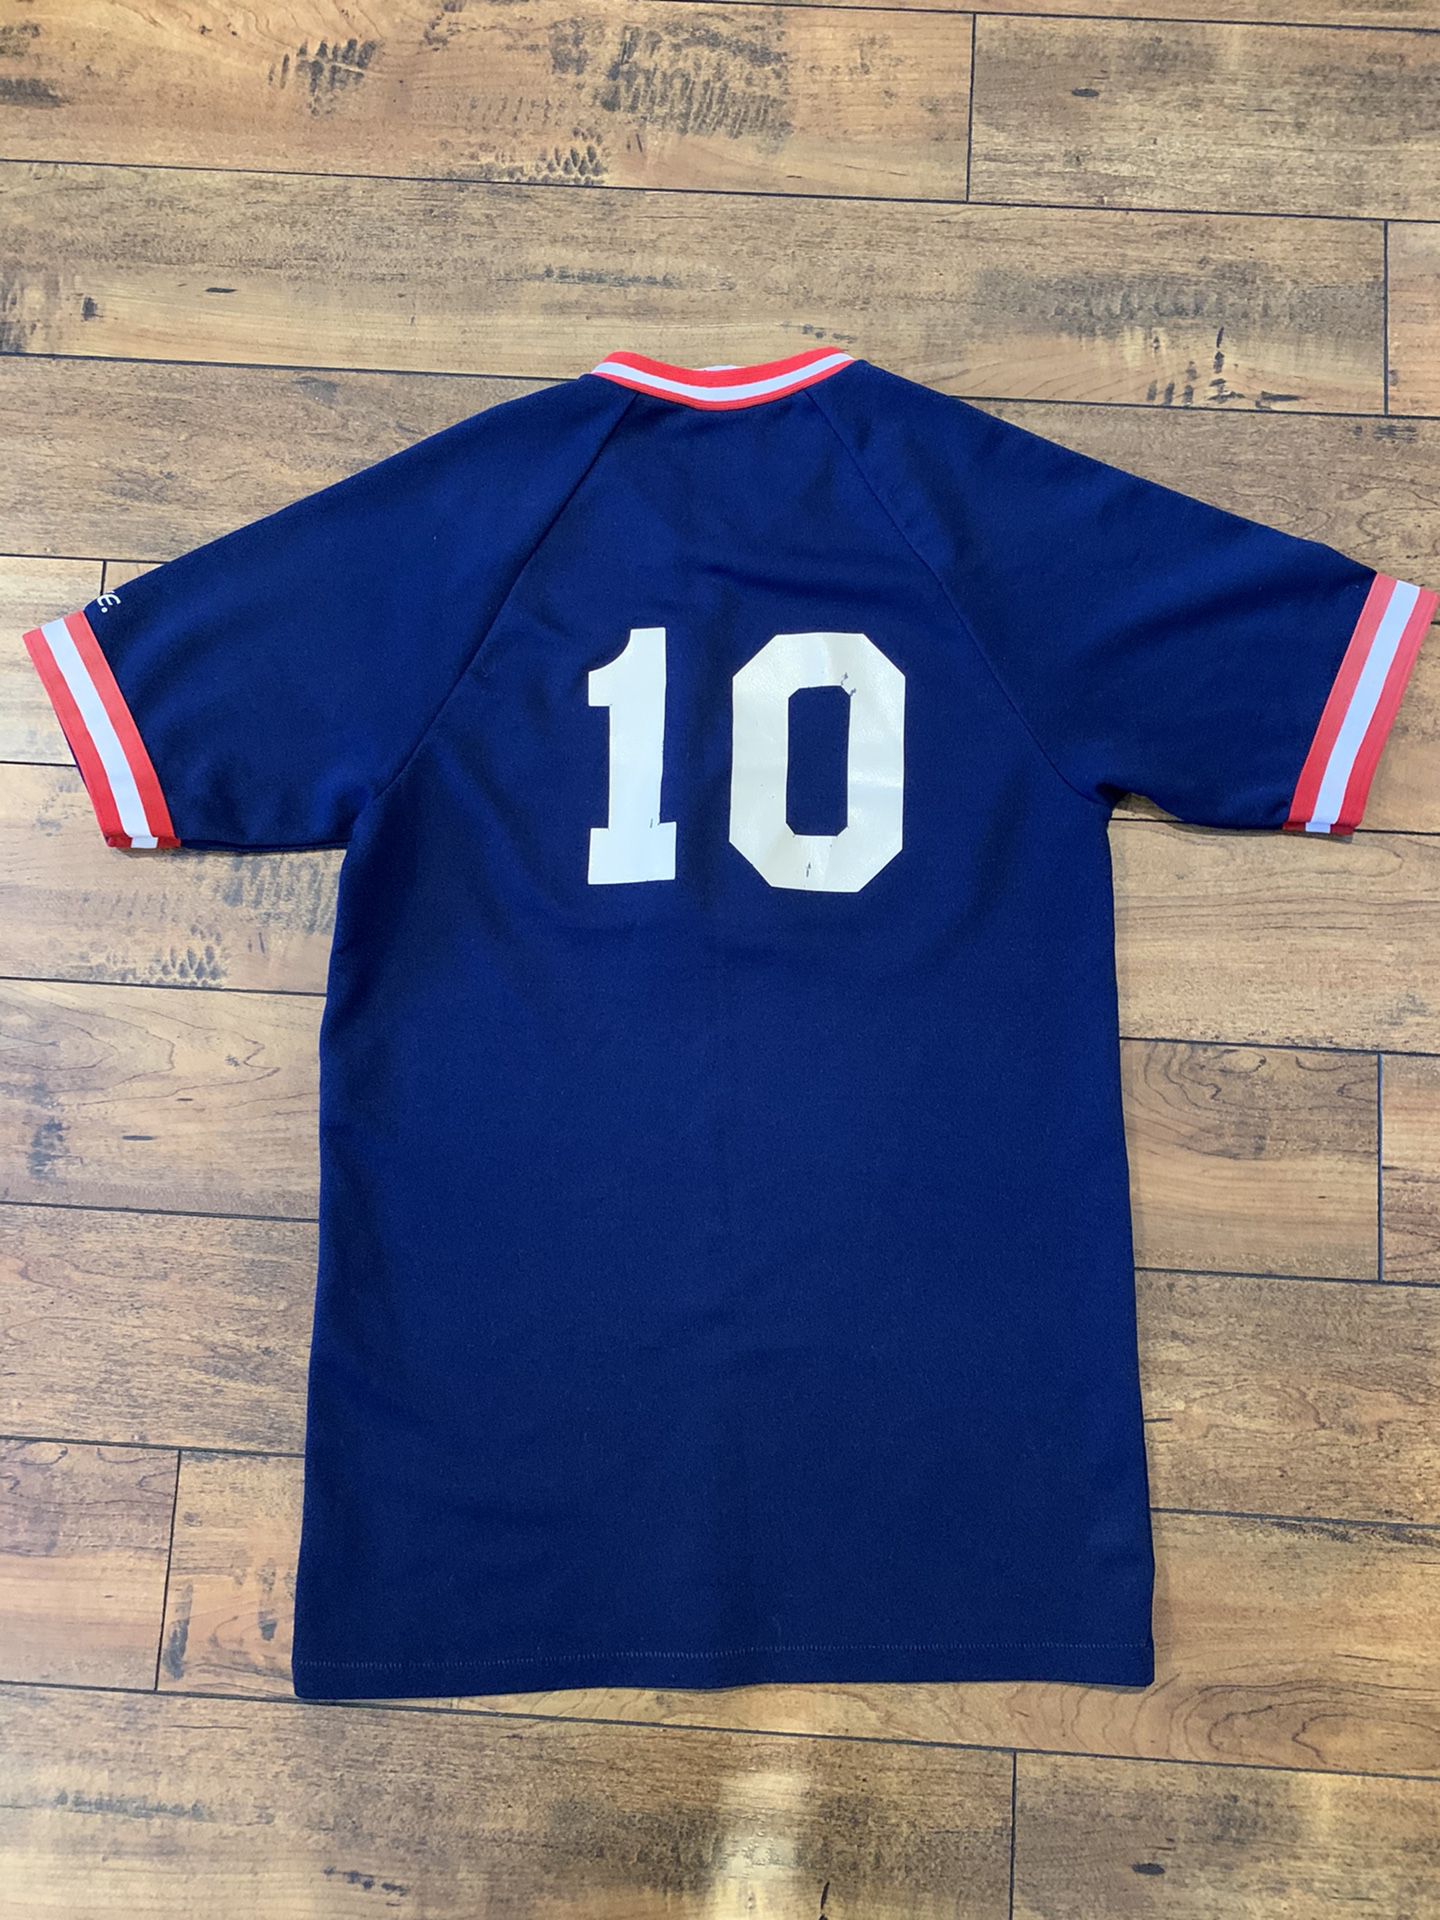 Vintage Anaheim Angels jersey for Sale in Covina, CA - OfferUp